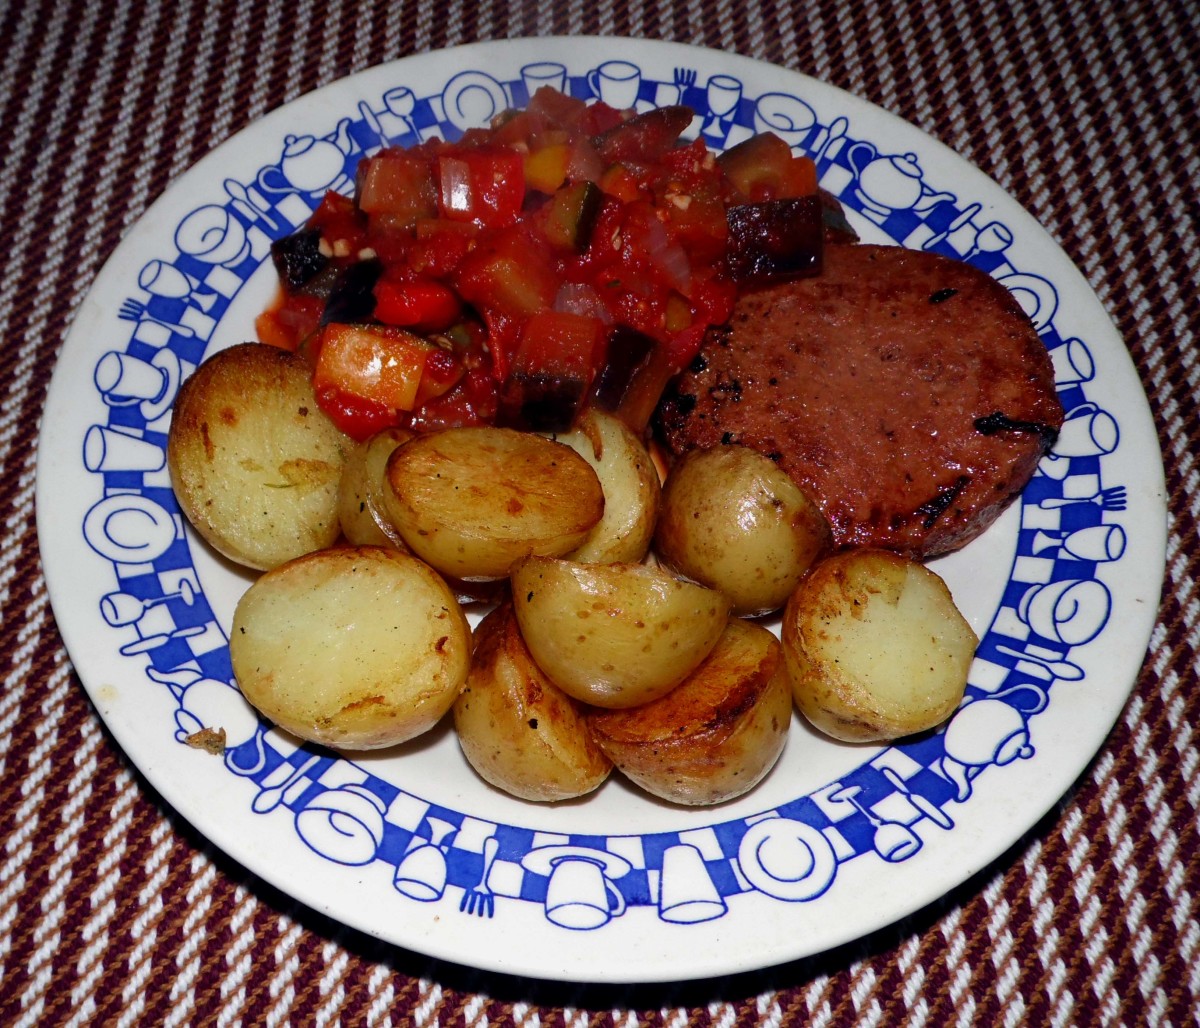 Ratatouille with burger and fried potatoes